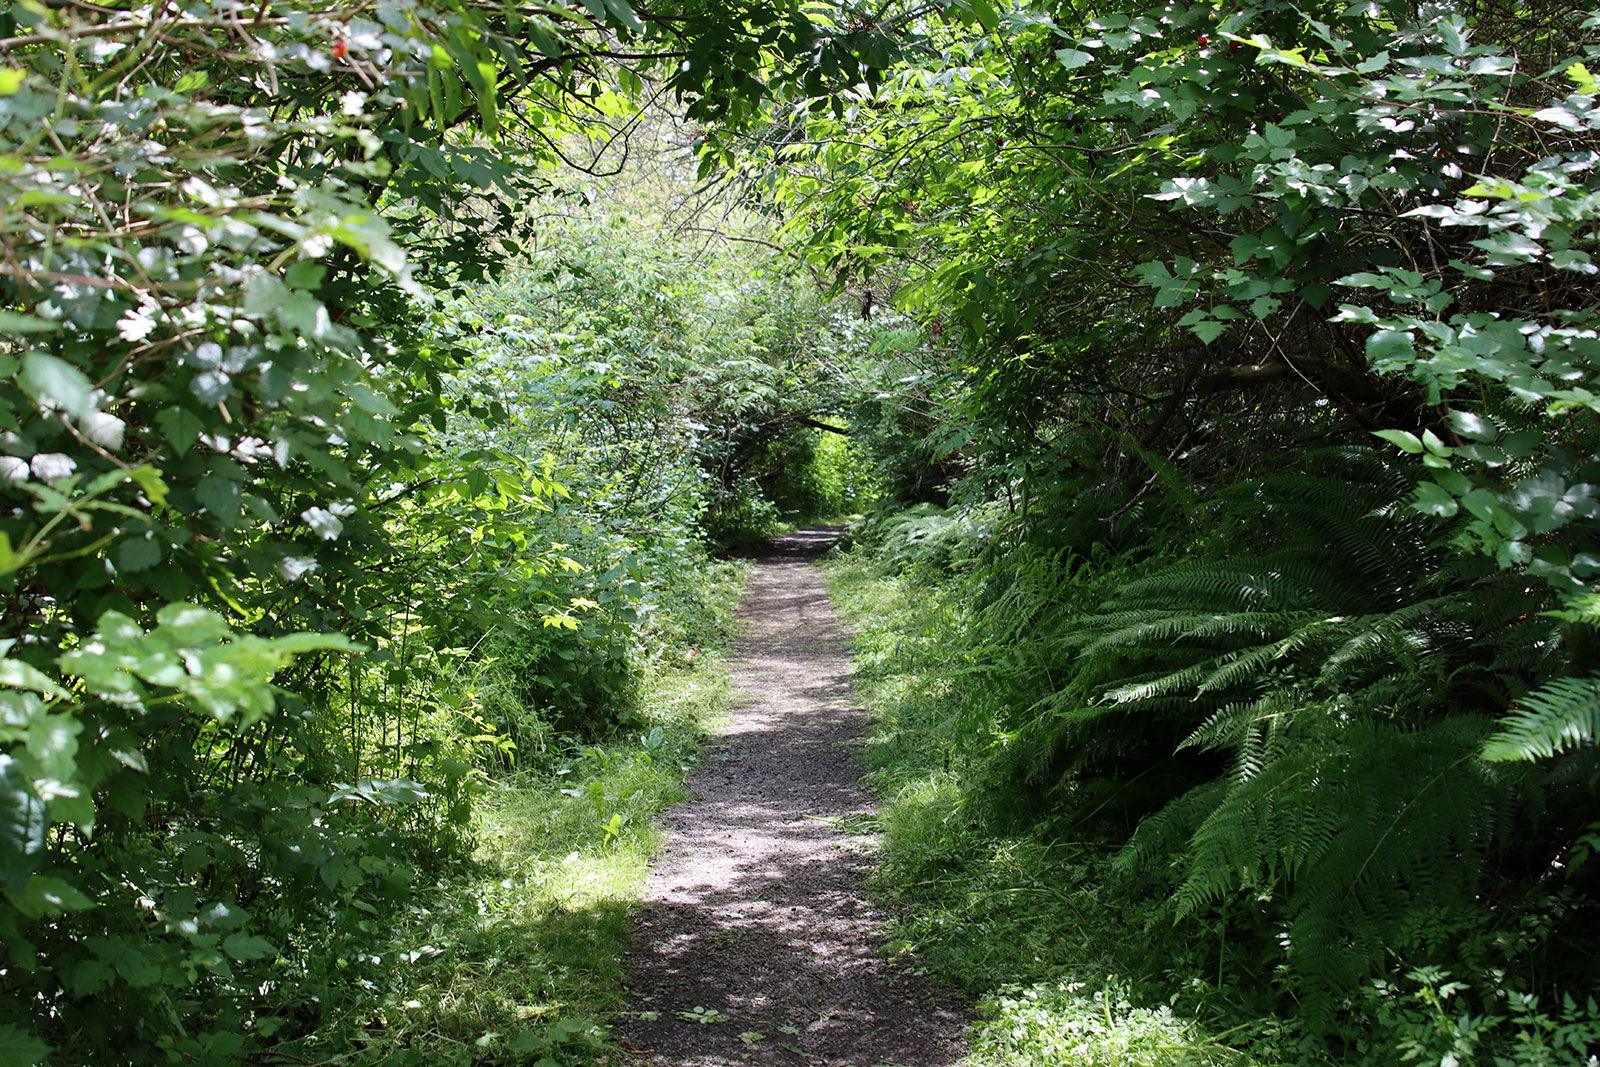 Path through a forested area